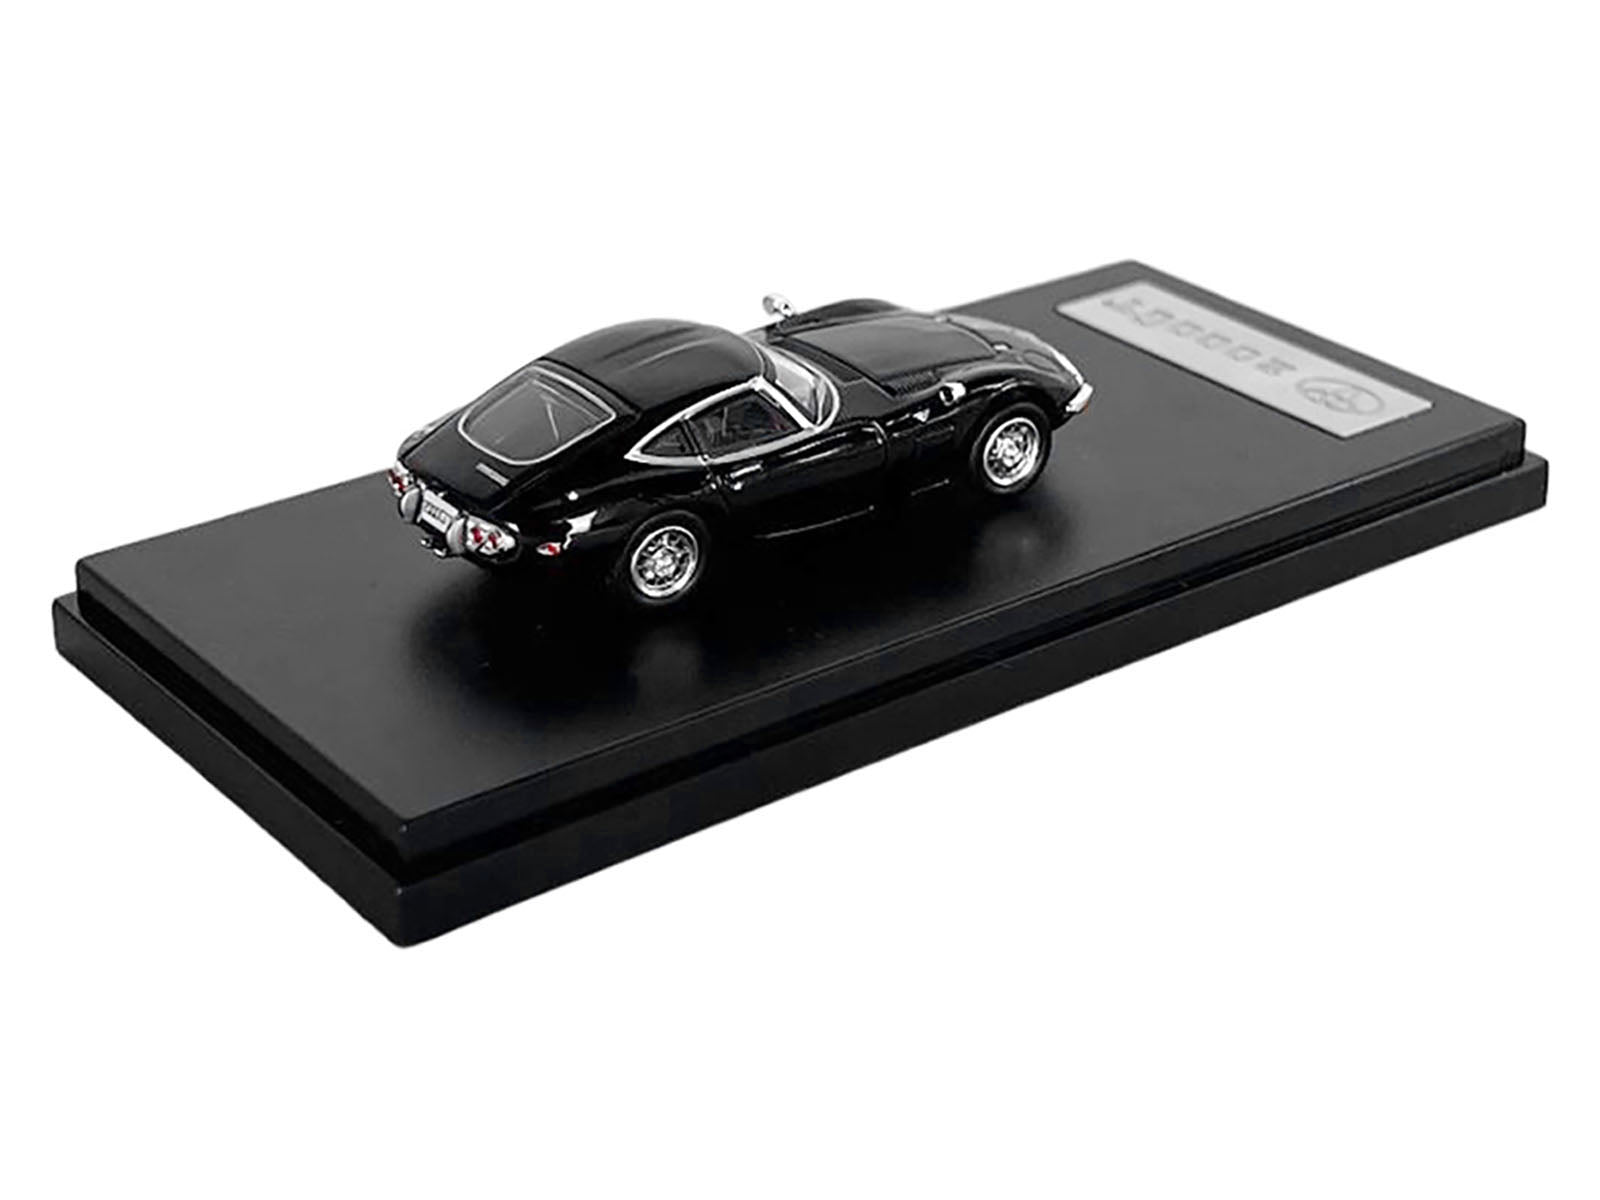 Brand new 1/64 scale diecast car model of Toyota 2000GT RHD (Right Hand Drive) Black die cast model car by LCD Models.
